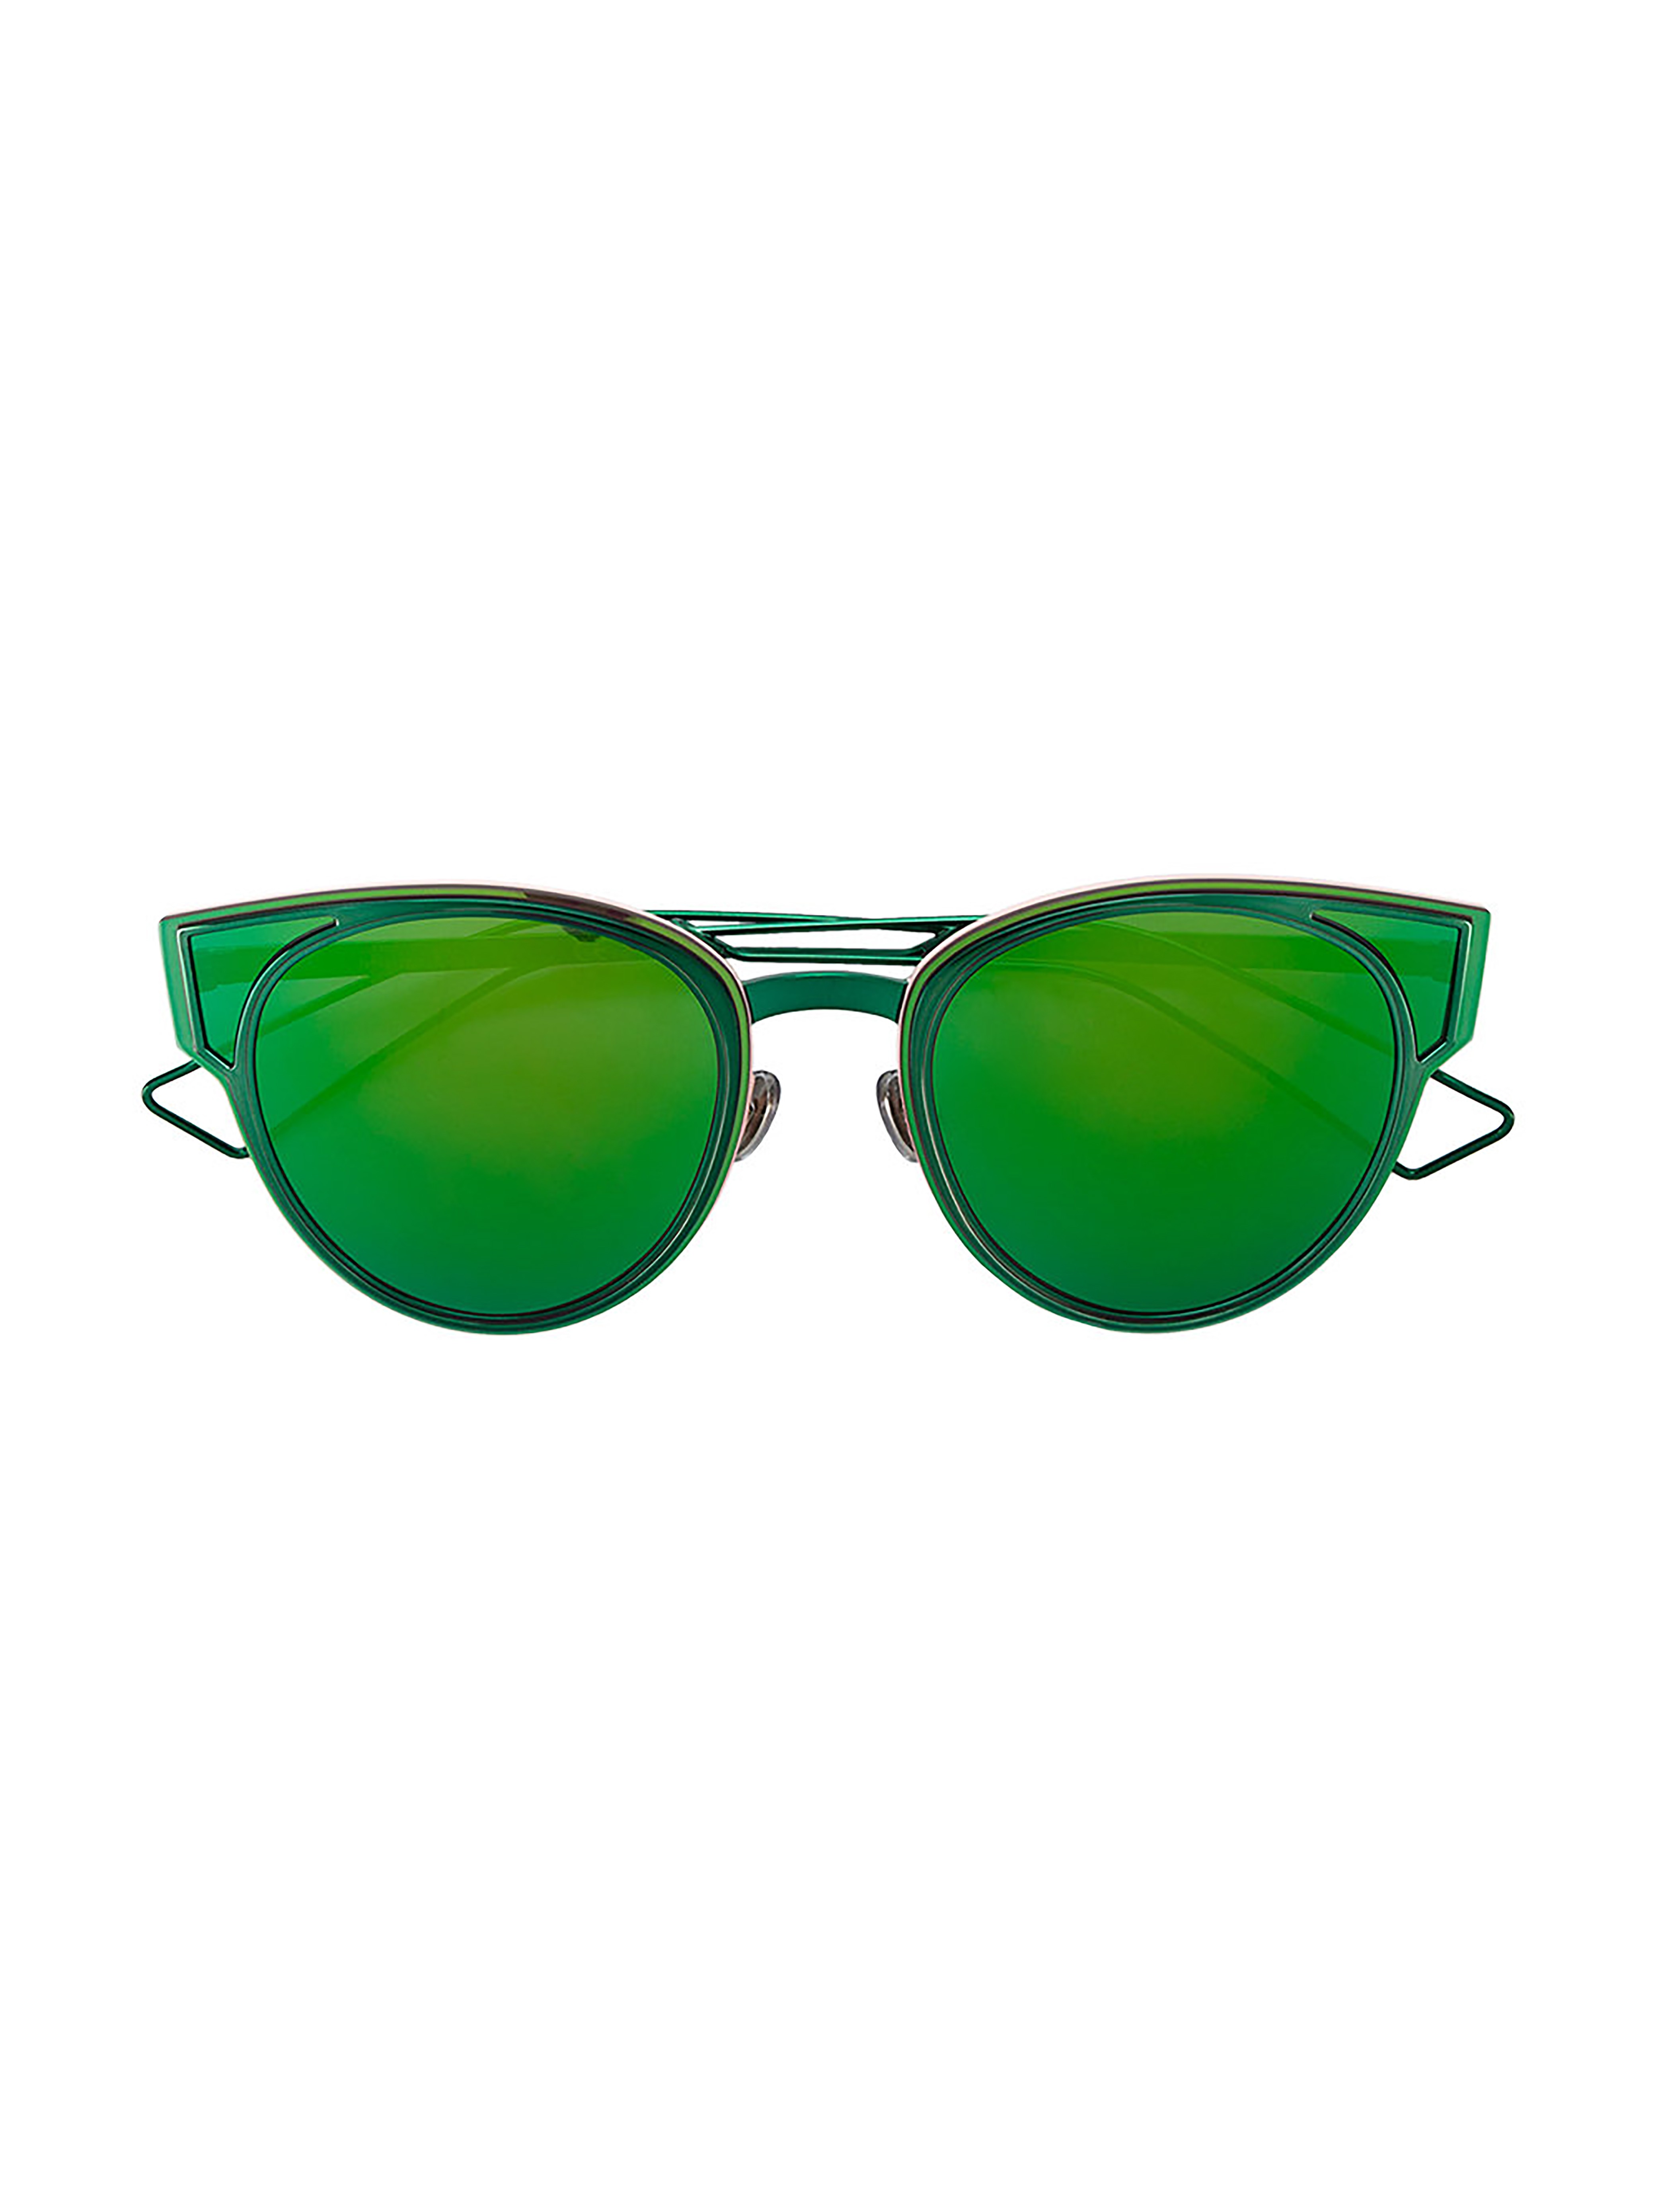 The bright Sculpt sunglasses by Dior, in particular, will make everyone go green with envy